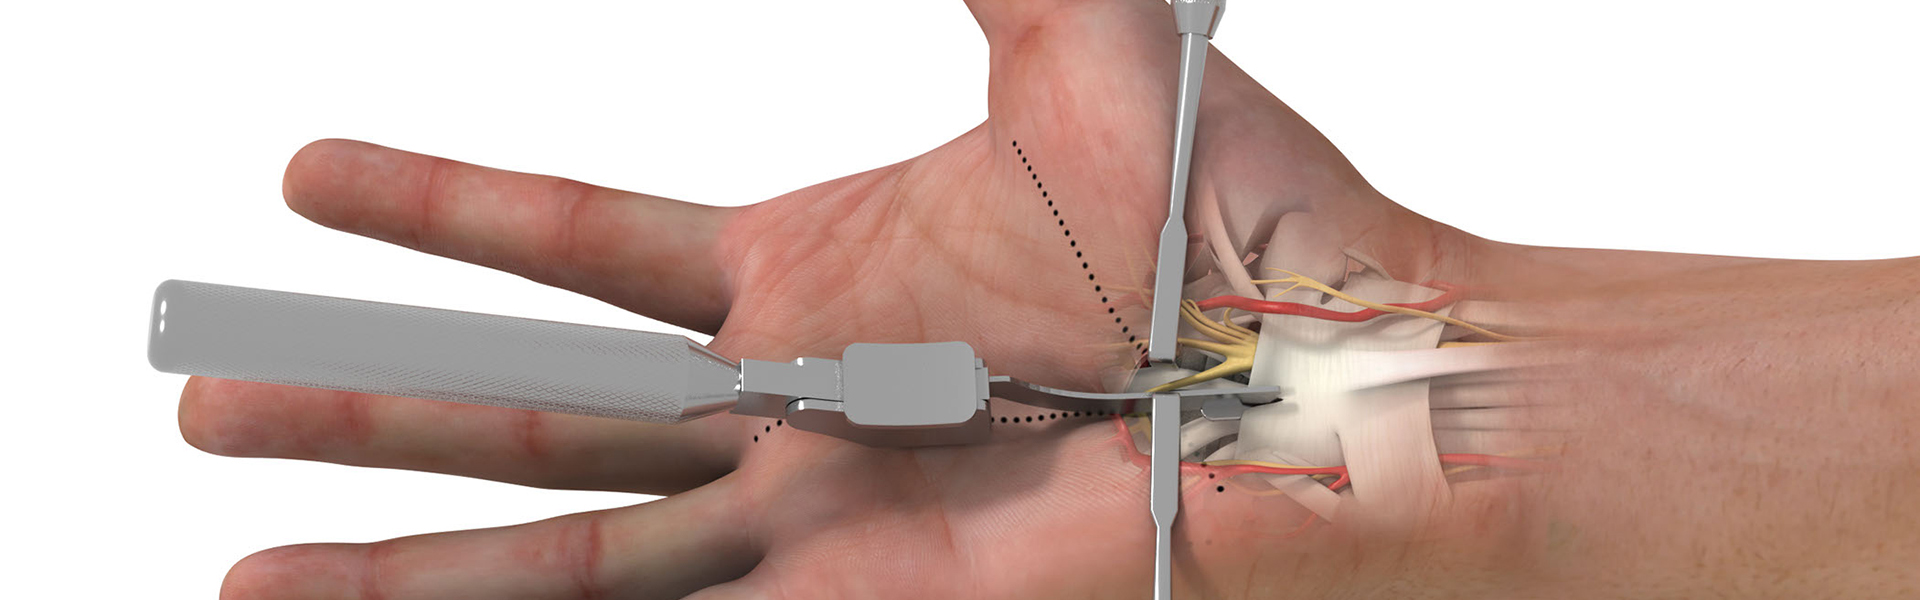 The Future of Minimally Invasive Surgery Helping Patient - 4 | S2S Surgical